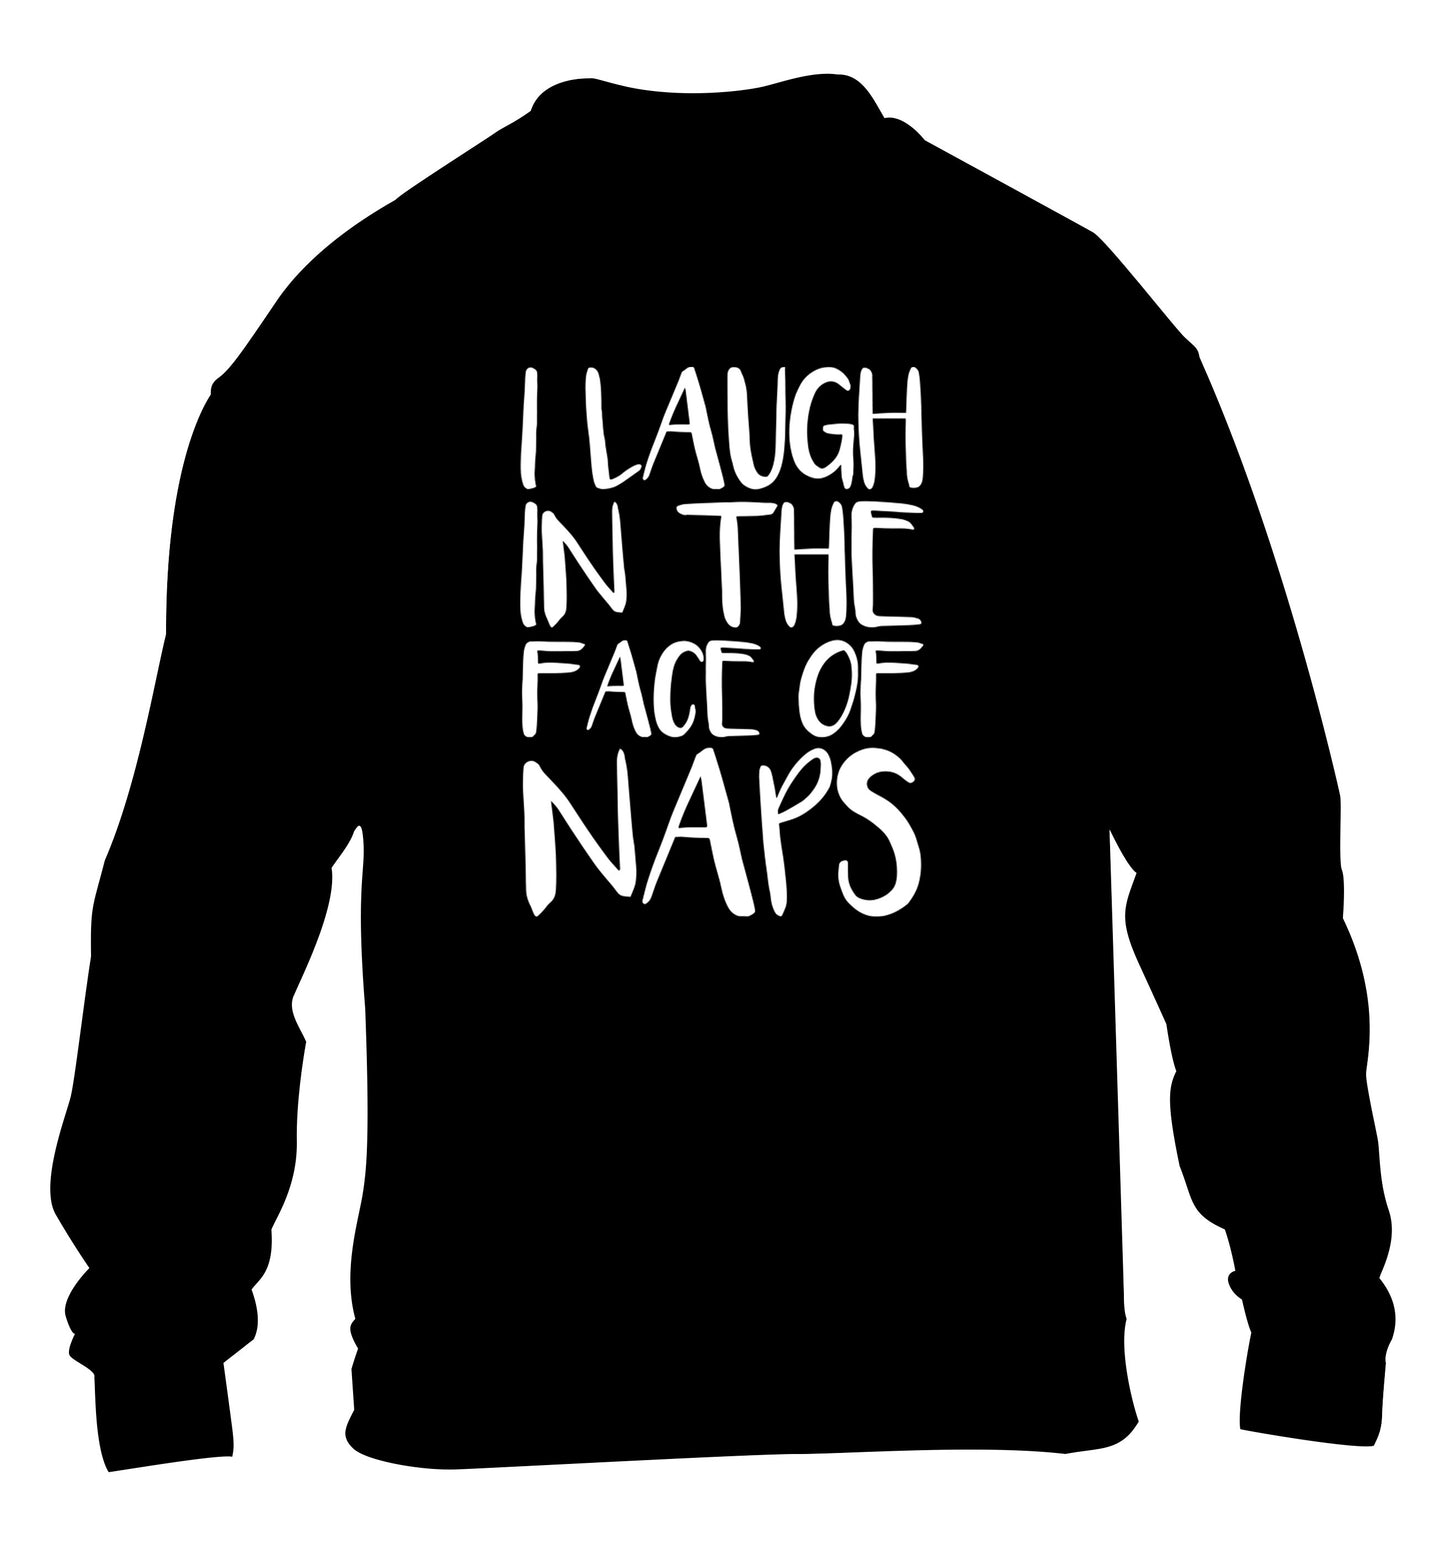 I laugh in the face of naps children's black sweater 12-14 Years